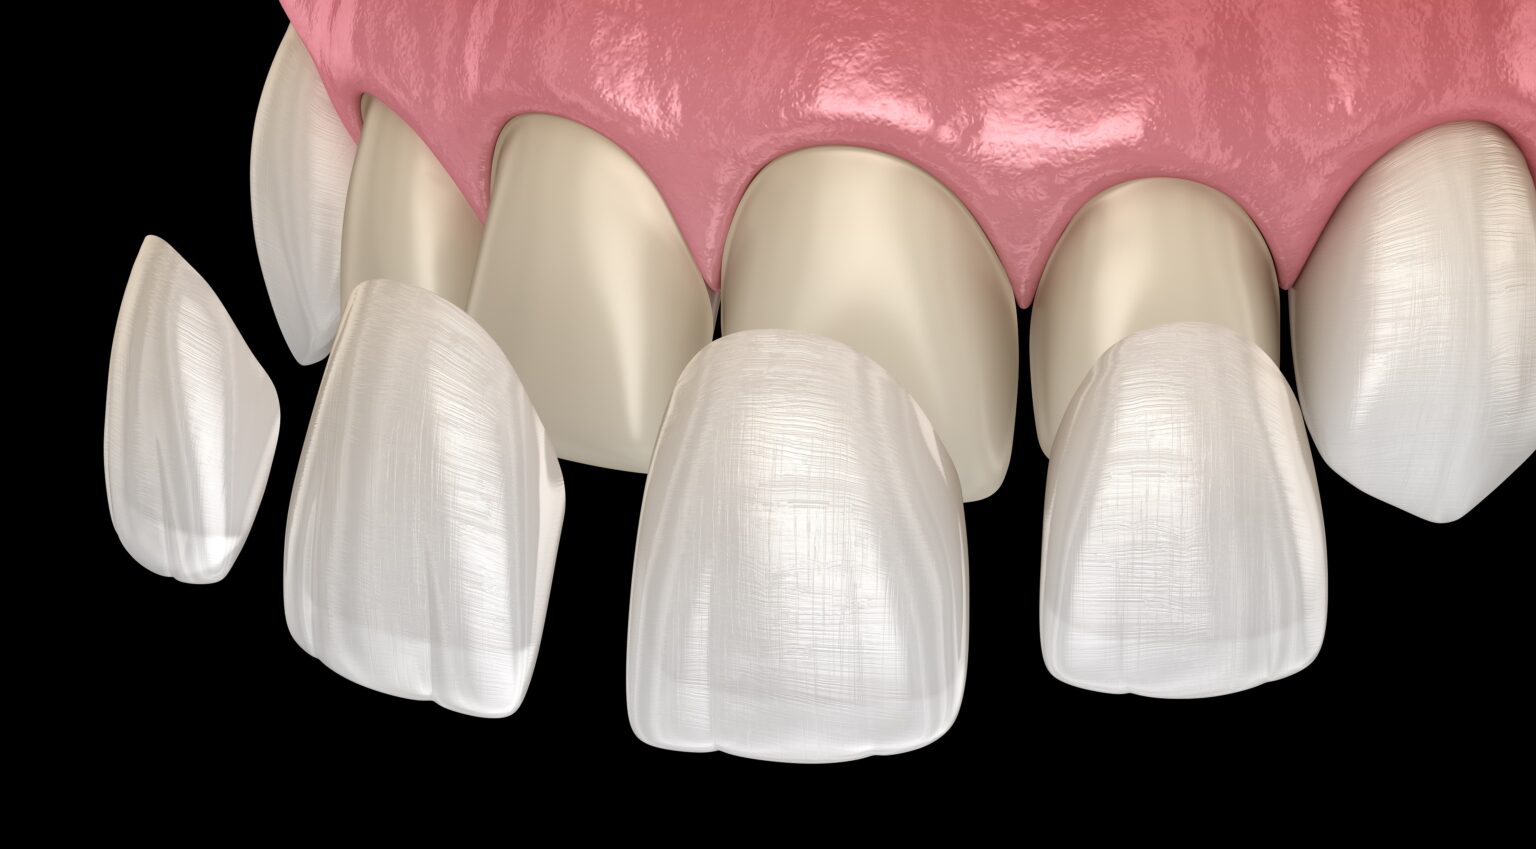 Painless Beauty: The Easy Process of Getting Laminate Veneers